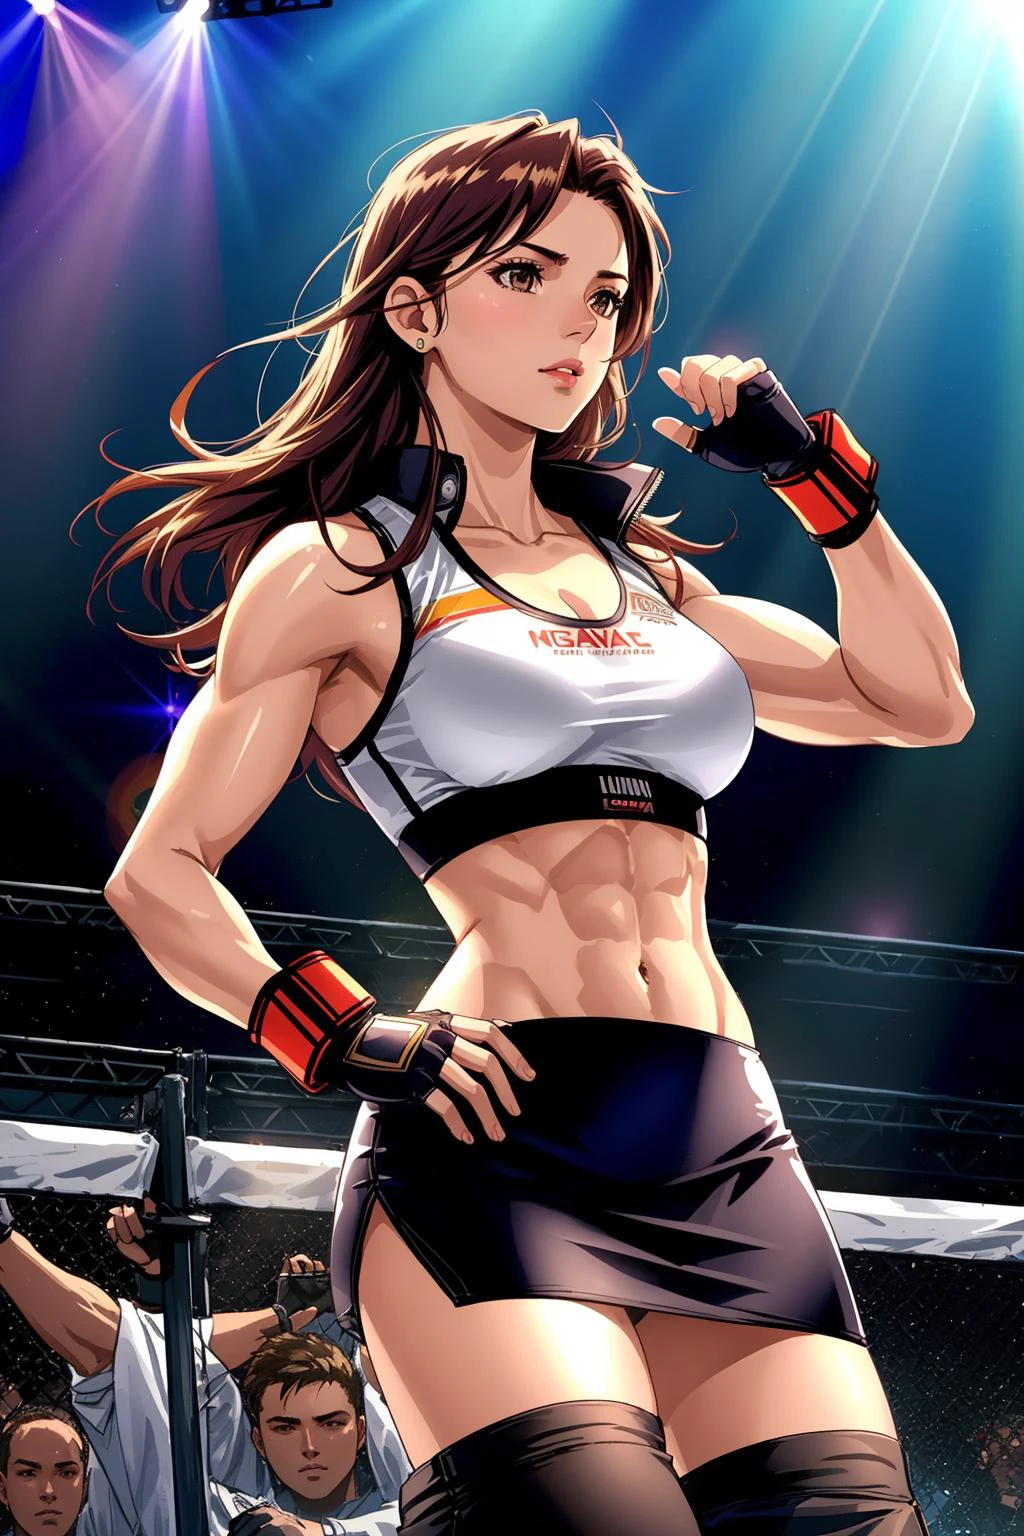 wmma, fingerless gloves, woman, midriff, toned, stage lights, fence,  vivid hair, pencil skirt, blouse, light rays, god rays, muscular, realistic, breasts